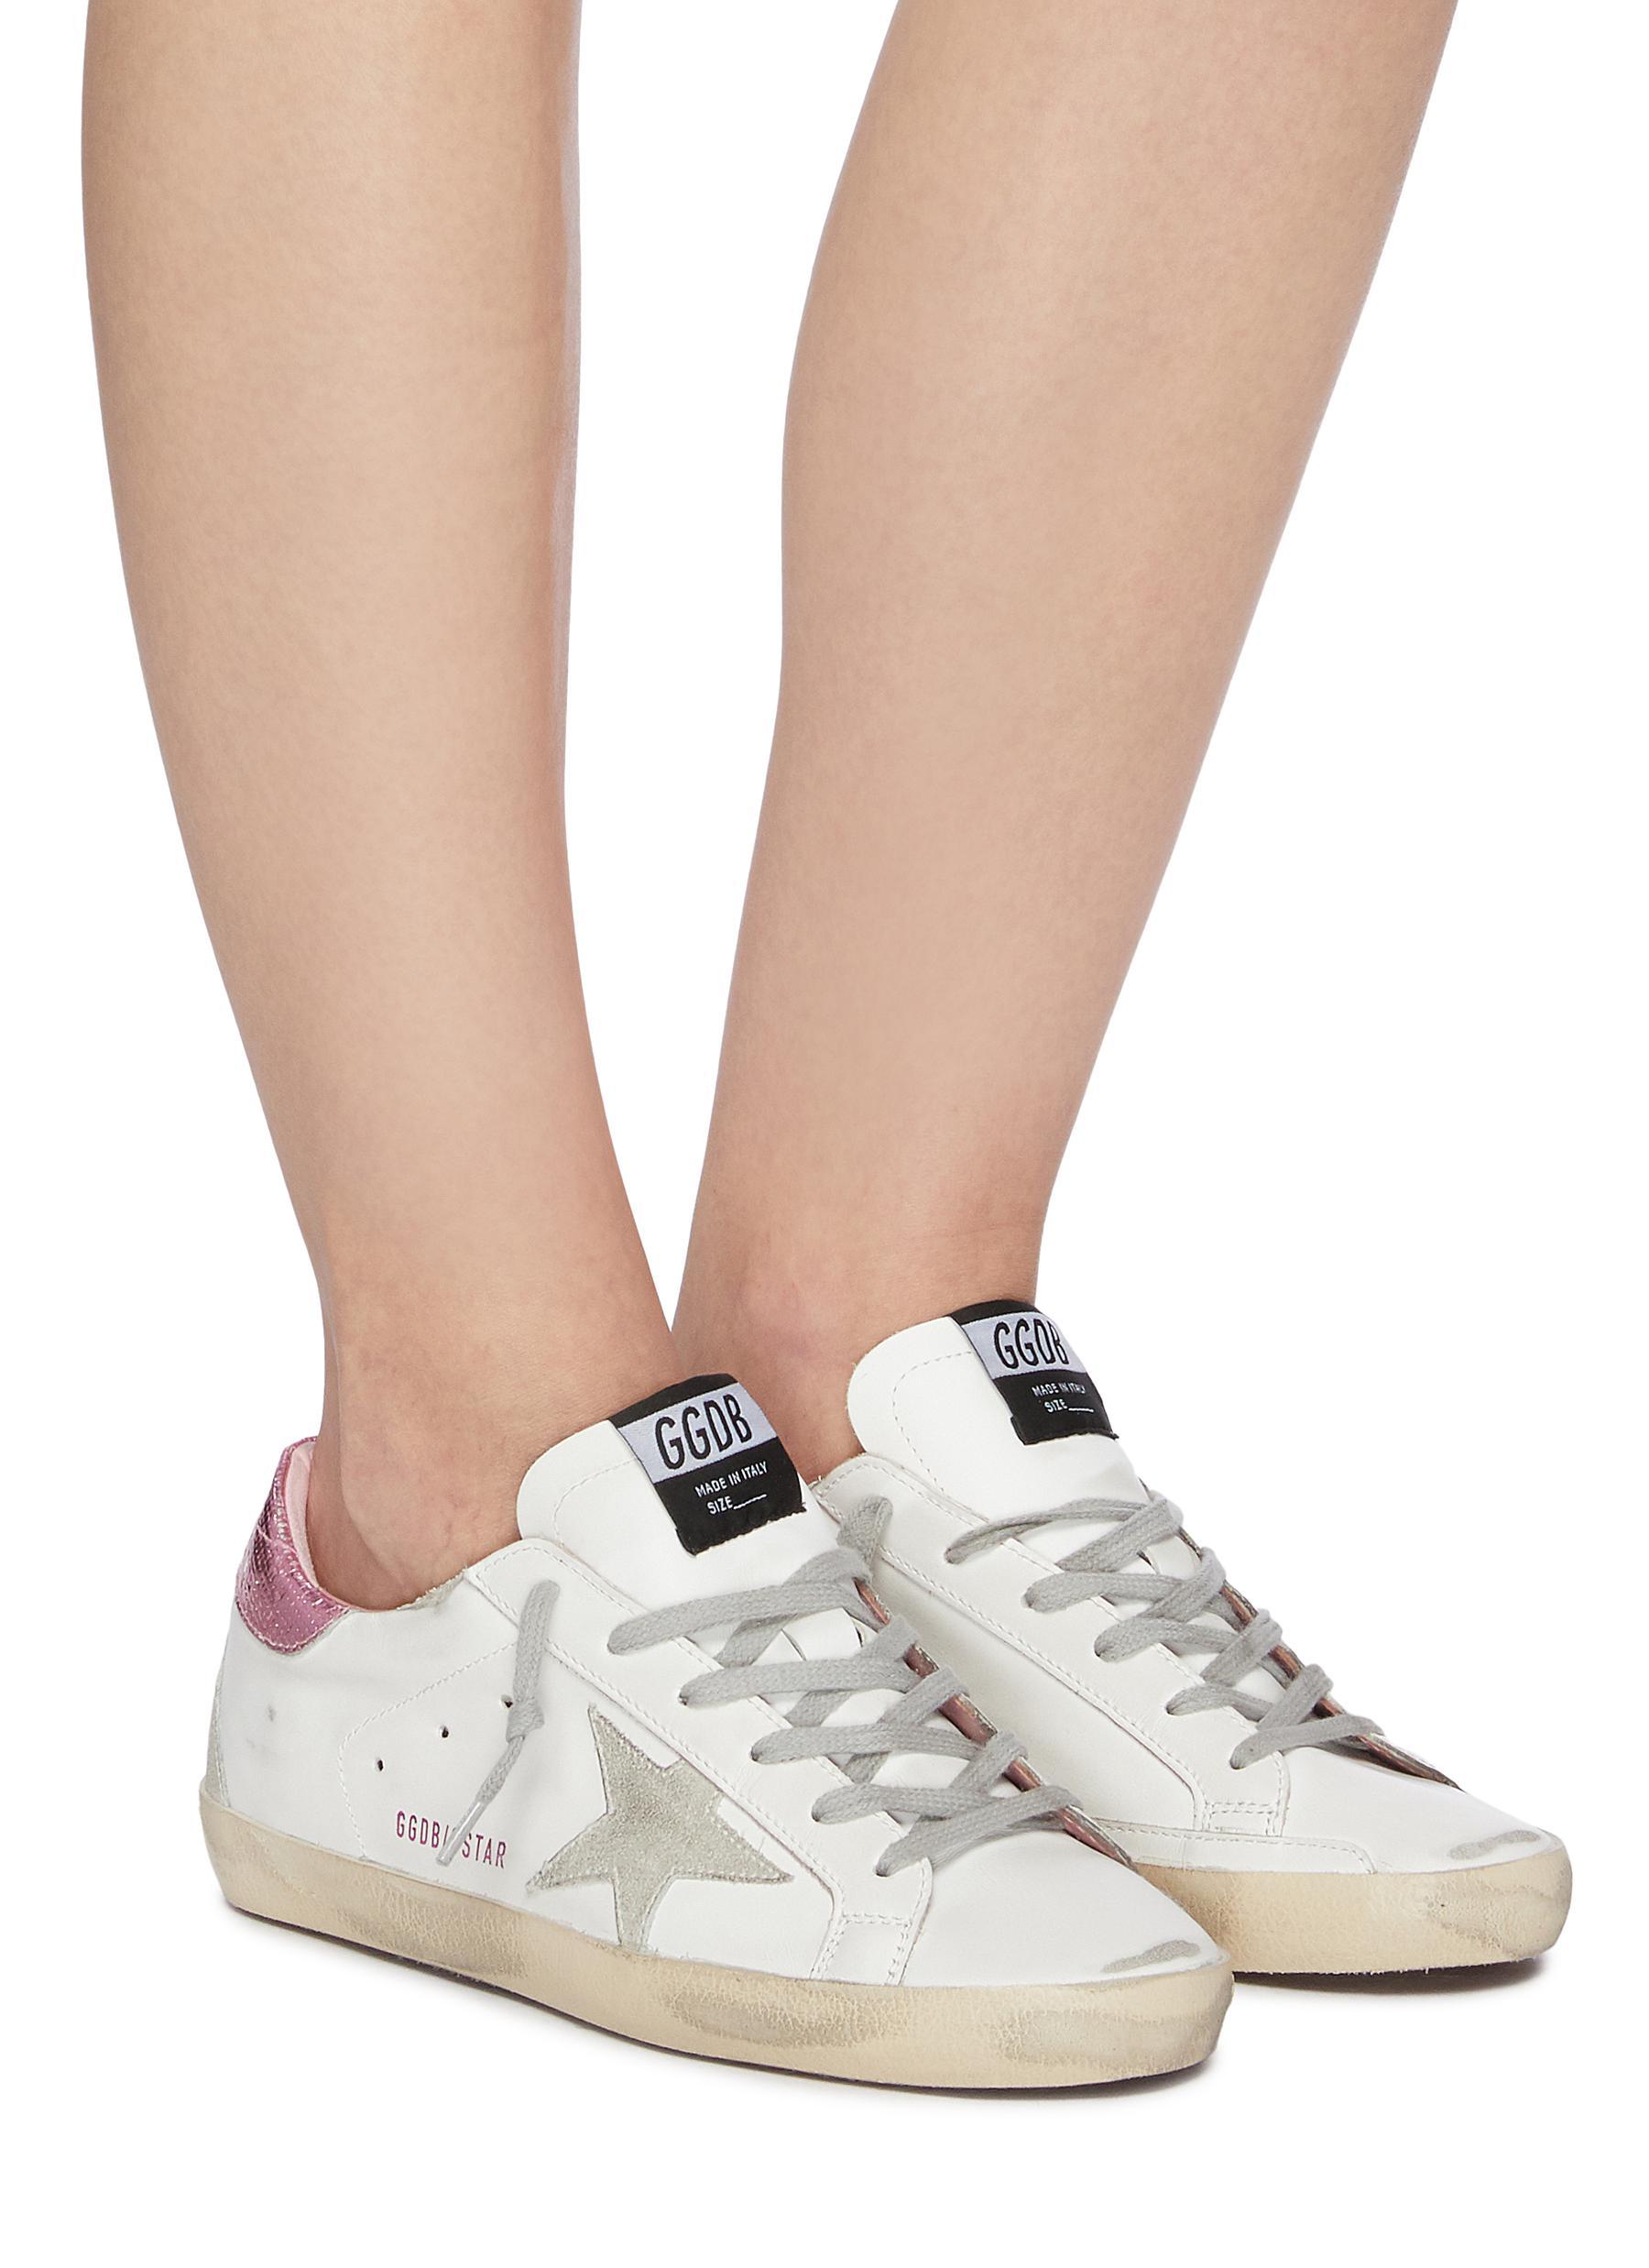 Golden Goose 'super-star' Laminated Heel Tab Distressed Leather Sneakers in  White | Lyst